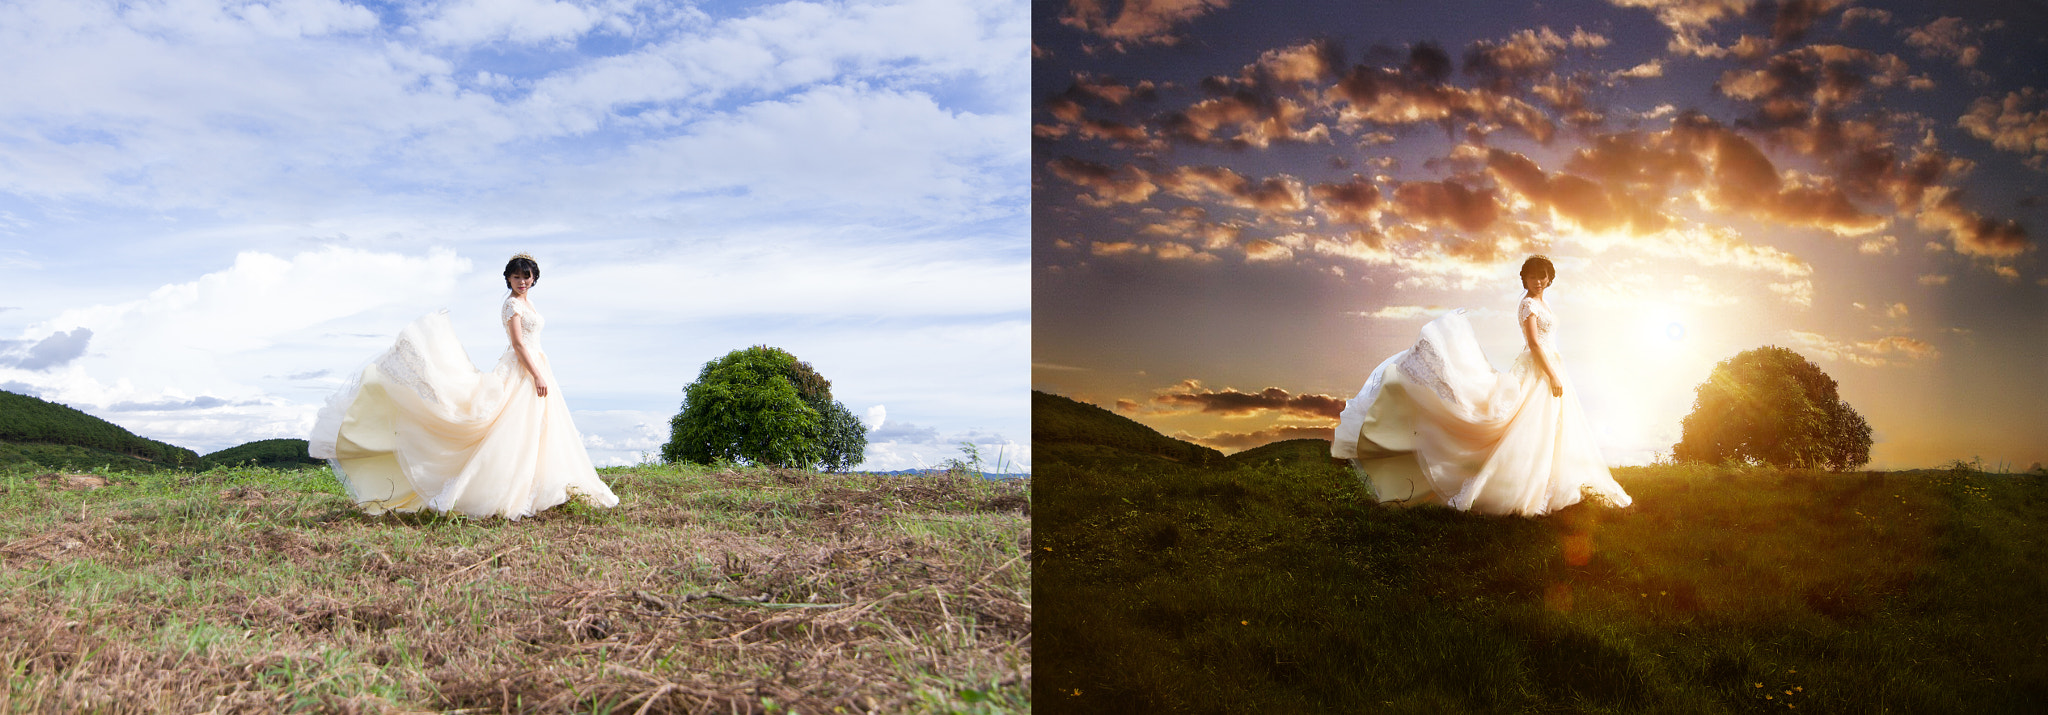 Canon EOS 7D + Tokina AT-X 11-20 F2.8 PRO DX Aspherical 11-20mm f/2.8 + 1.4x sample photo. Before and after ! photography